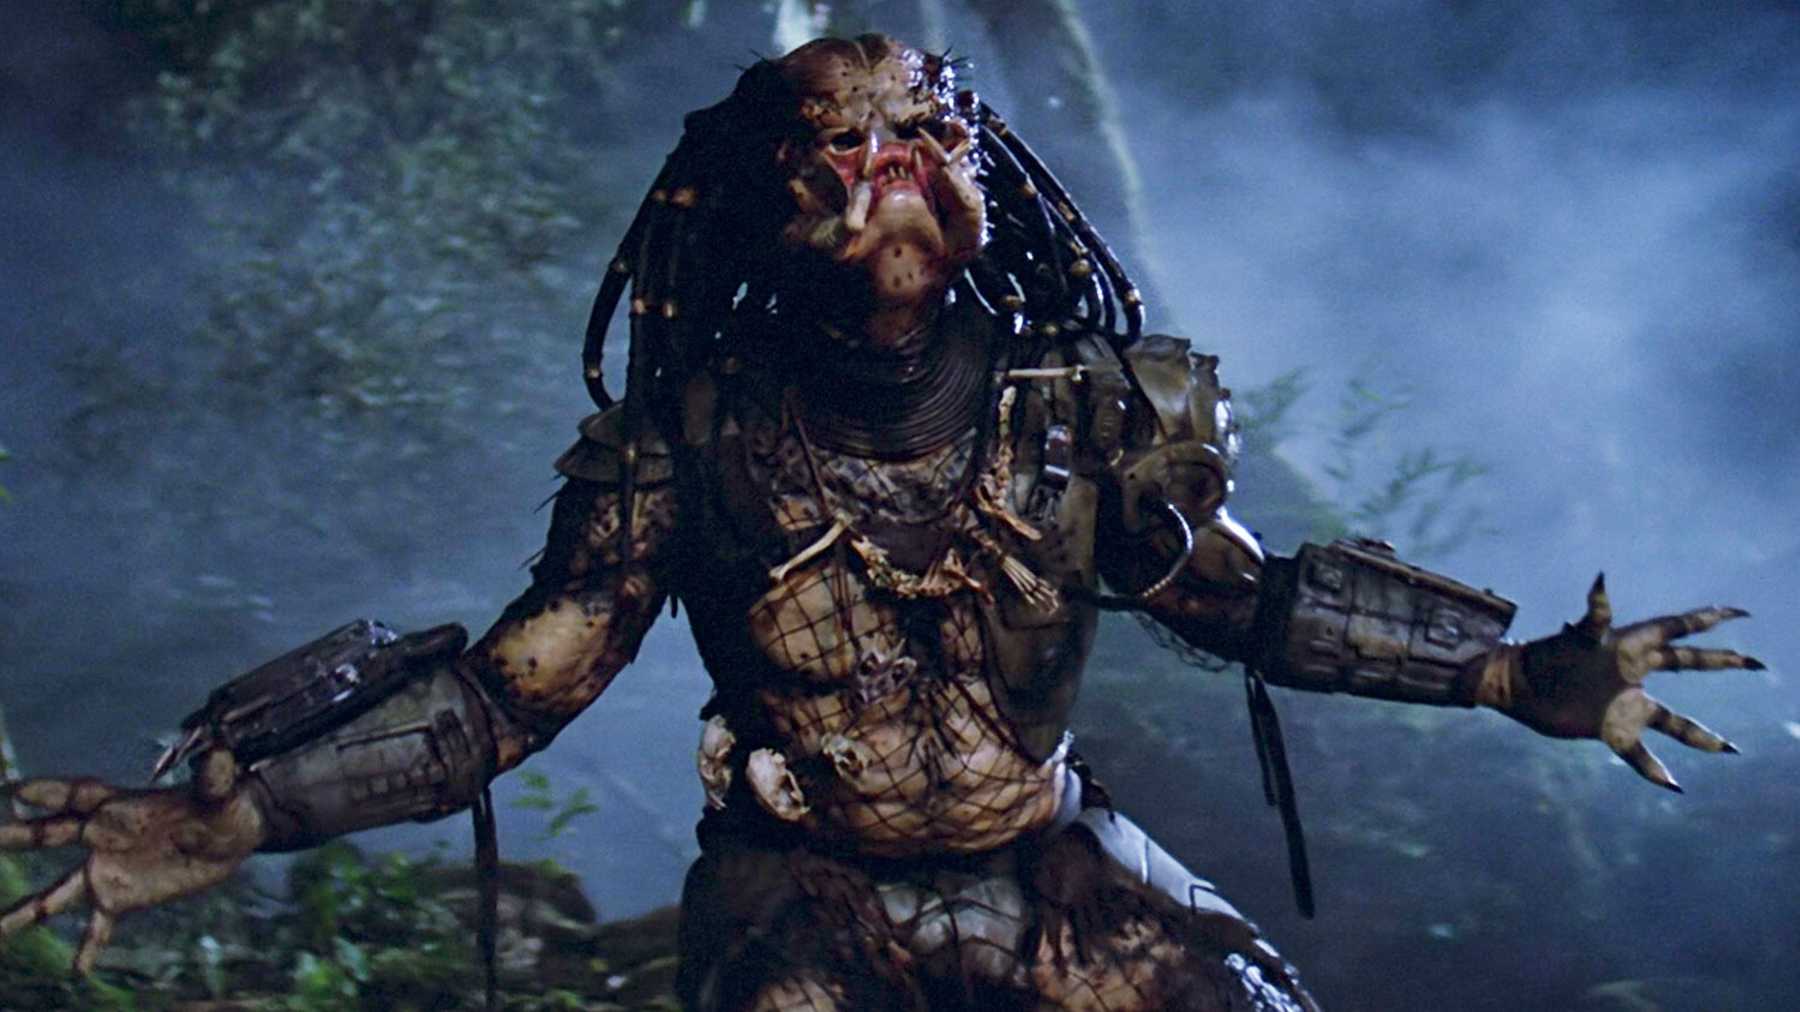 Prey' is the Top-Rated 'Predator' Movie on Rotten Tomatoes, by a Mile